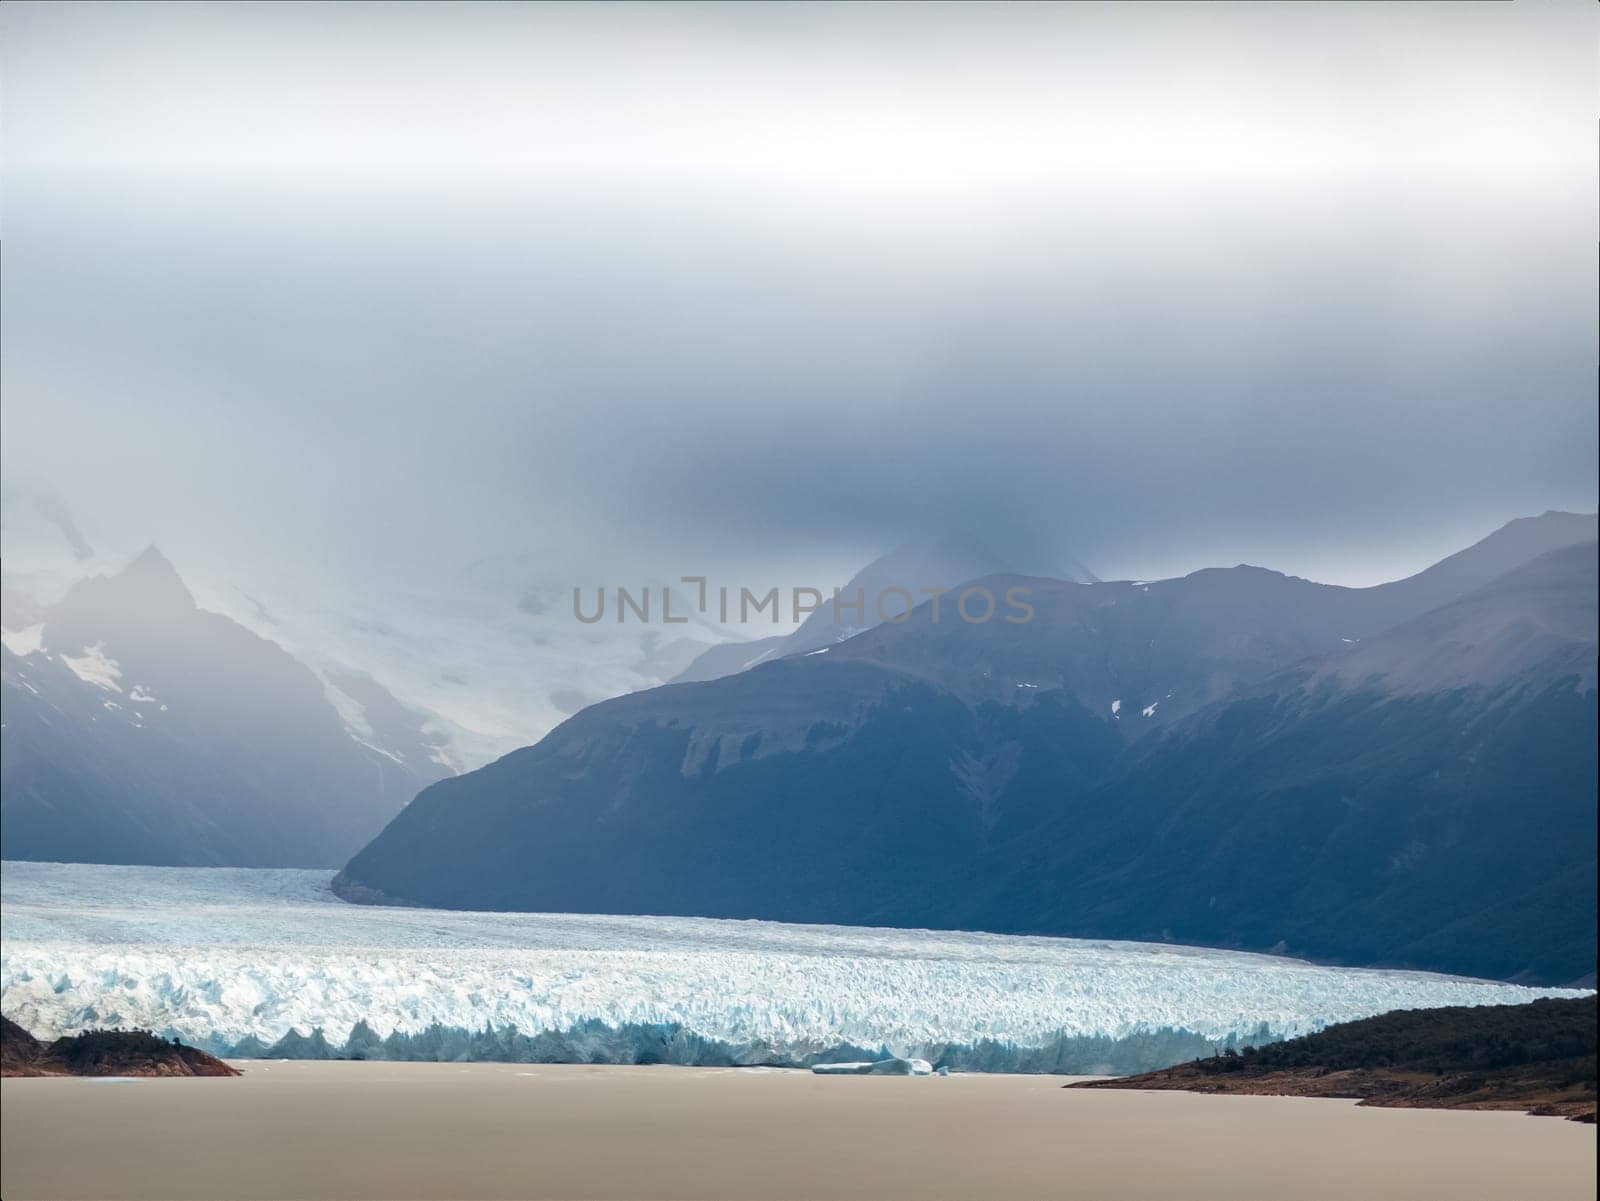 Glacier and mountains under dramatic cloudy sky.